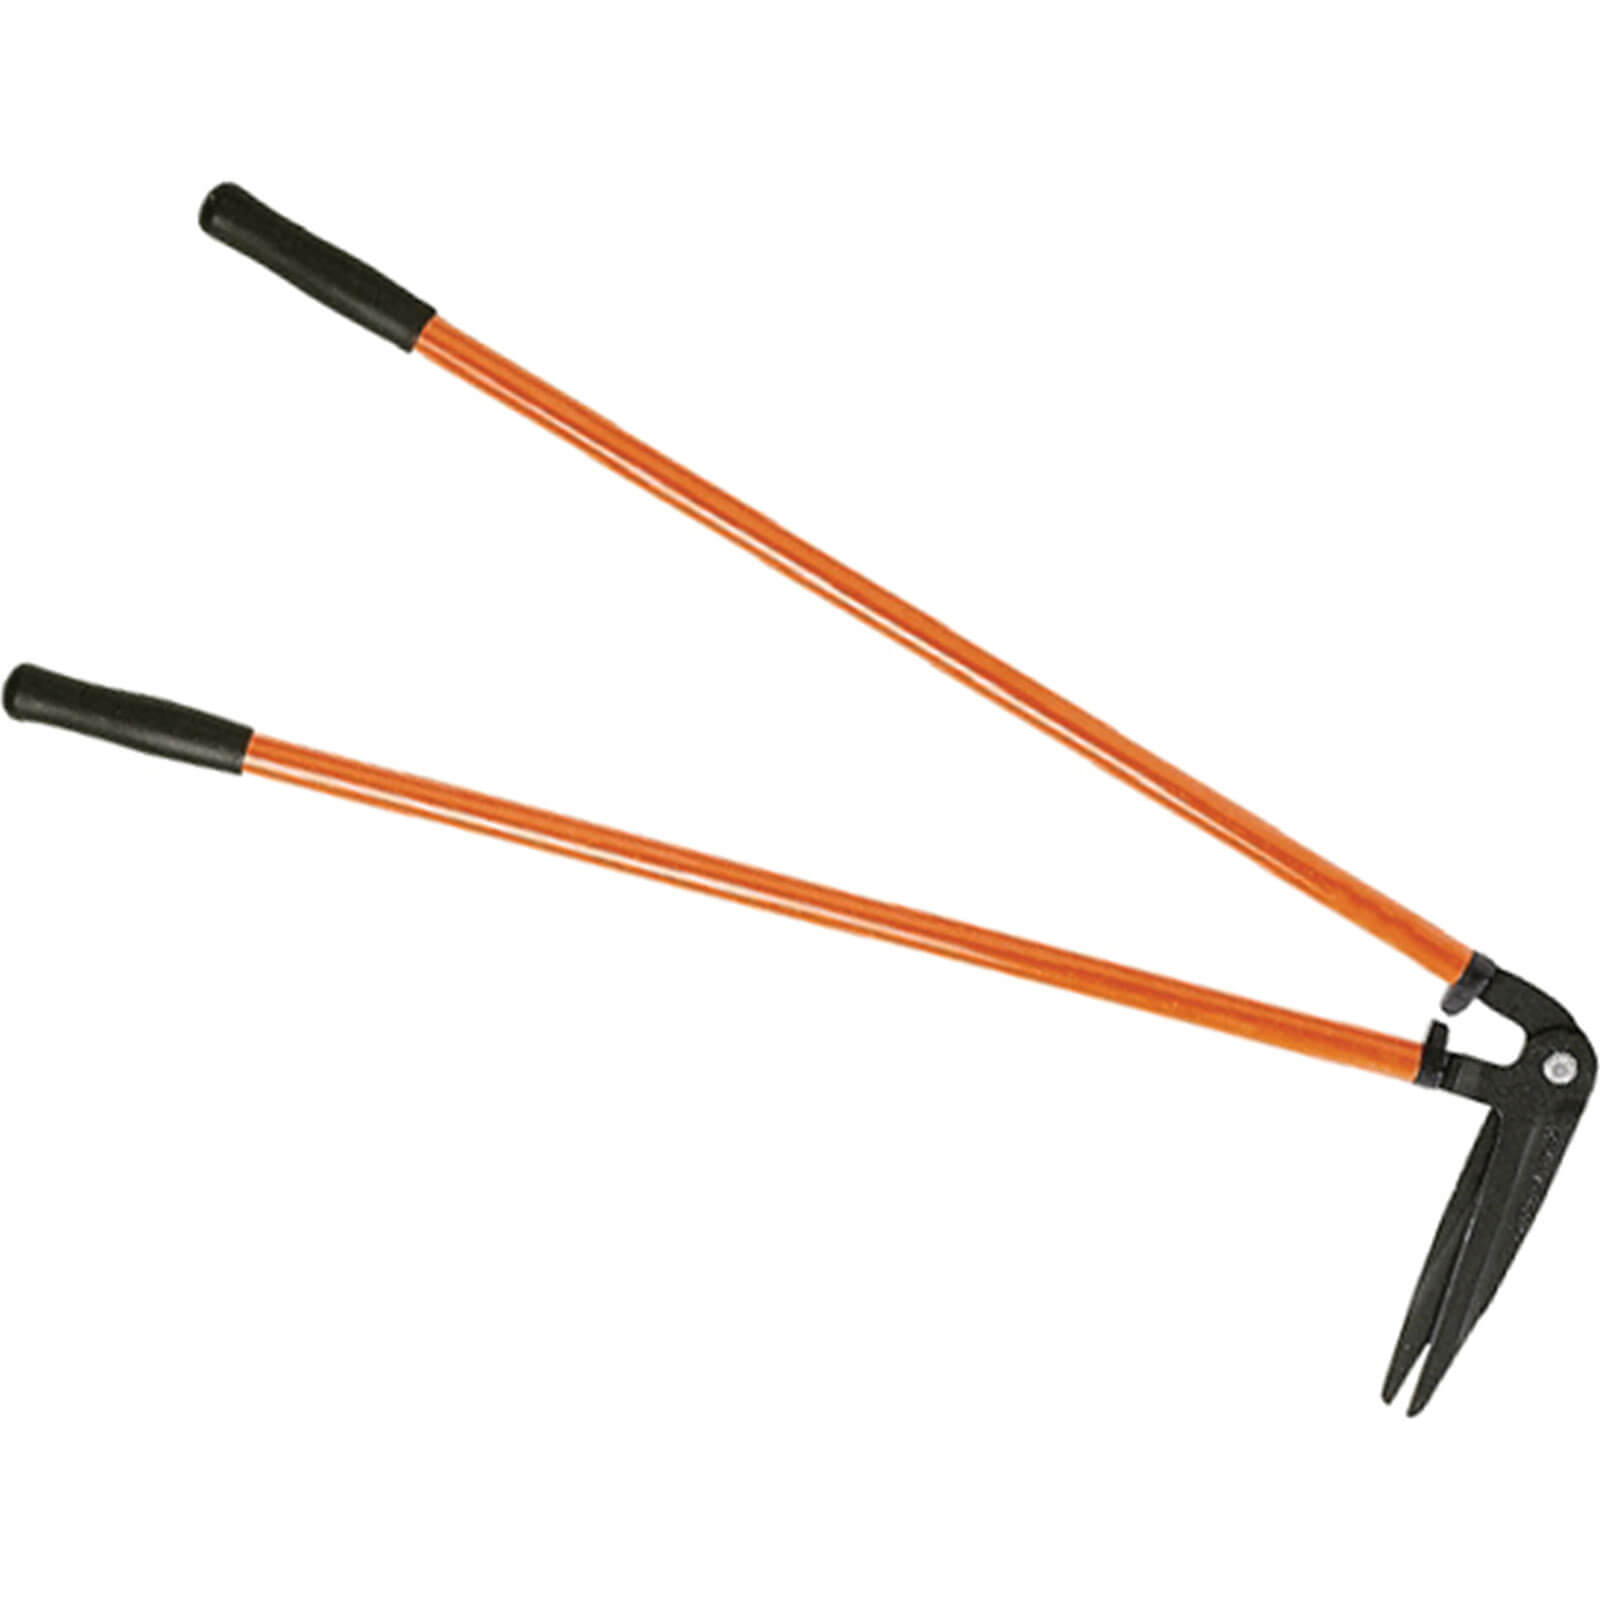 Image of Bahco P75 Grass Edging Shears